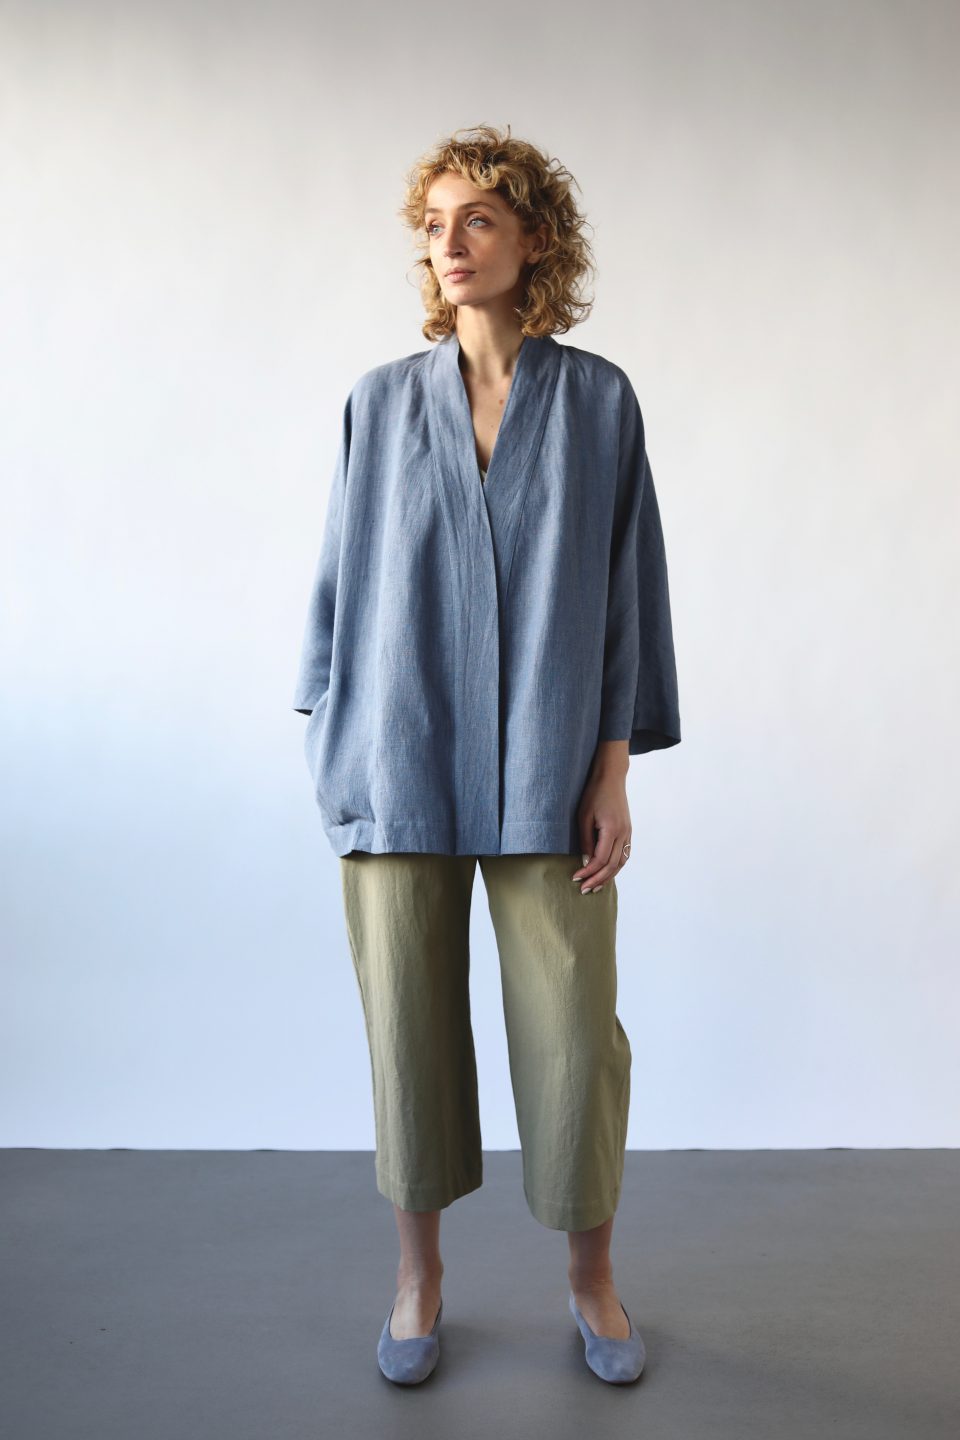 Loose Fit Linen Wrap Jacket | Jackets | Sustainable clothing | OffOn clothing